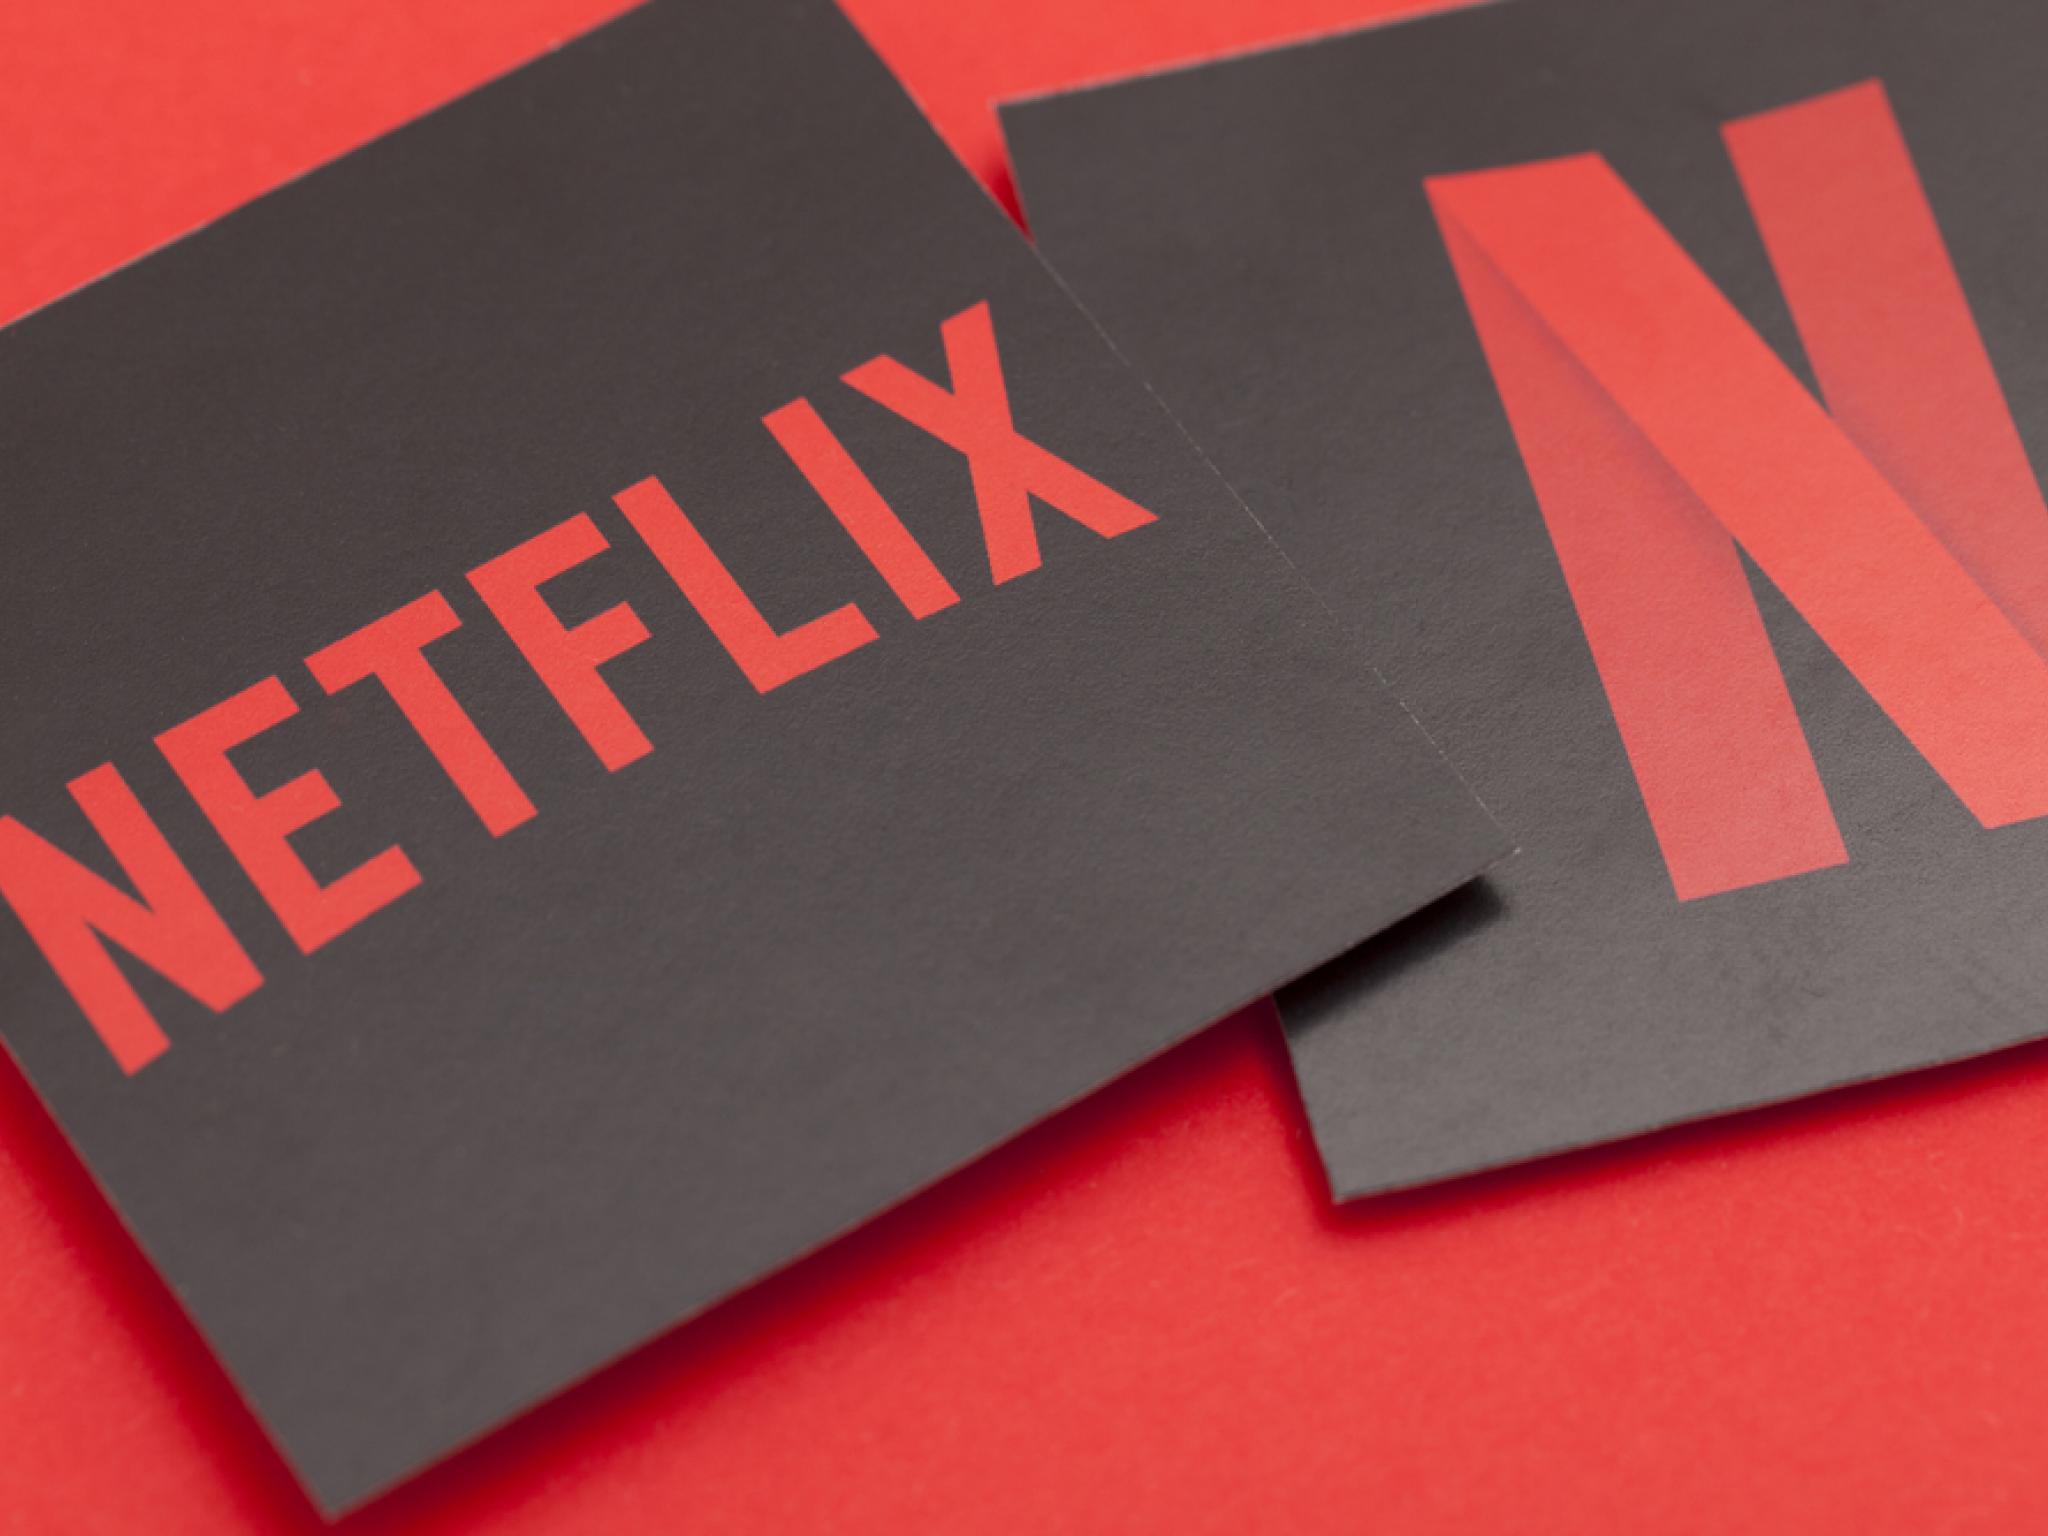  netflixs-ad-tier-accretion-despite-subscriber-deceleration-add-to-stock-upside-analyst-projects 